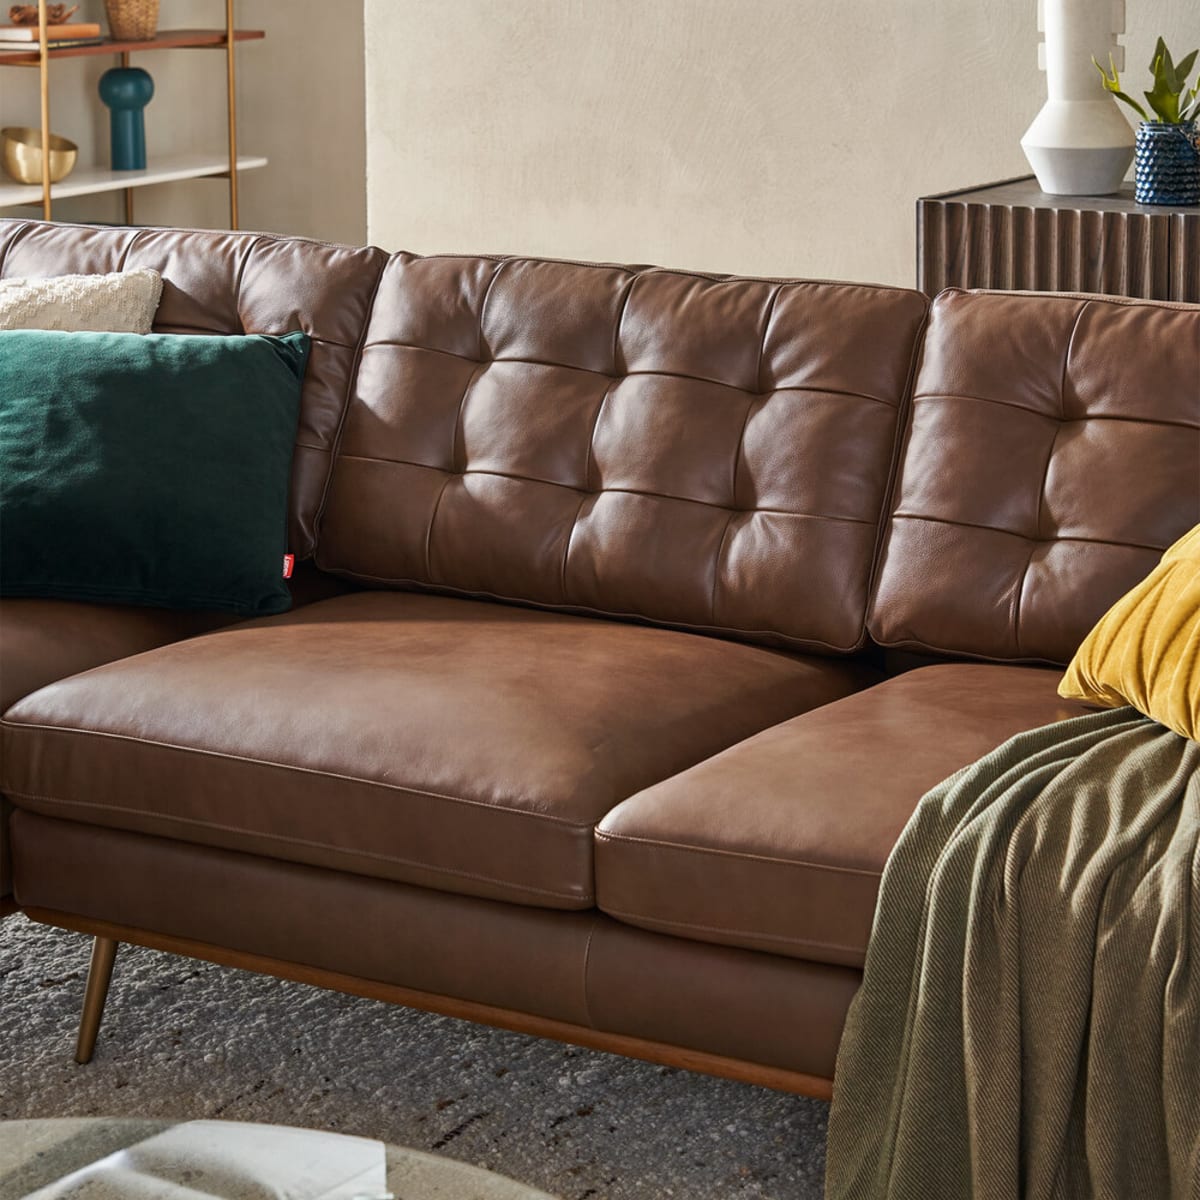 How To Prevent Mold On Leather Sofa